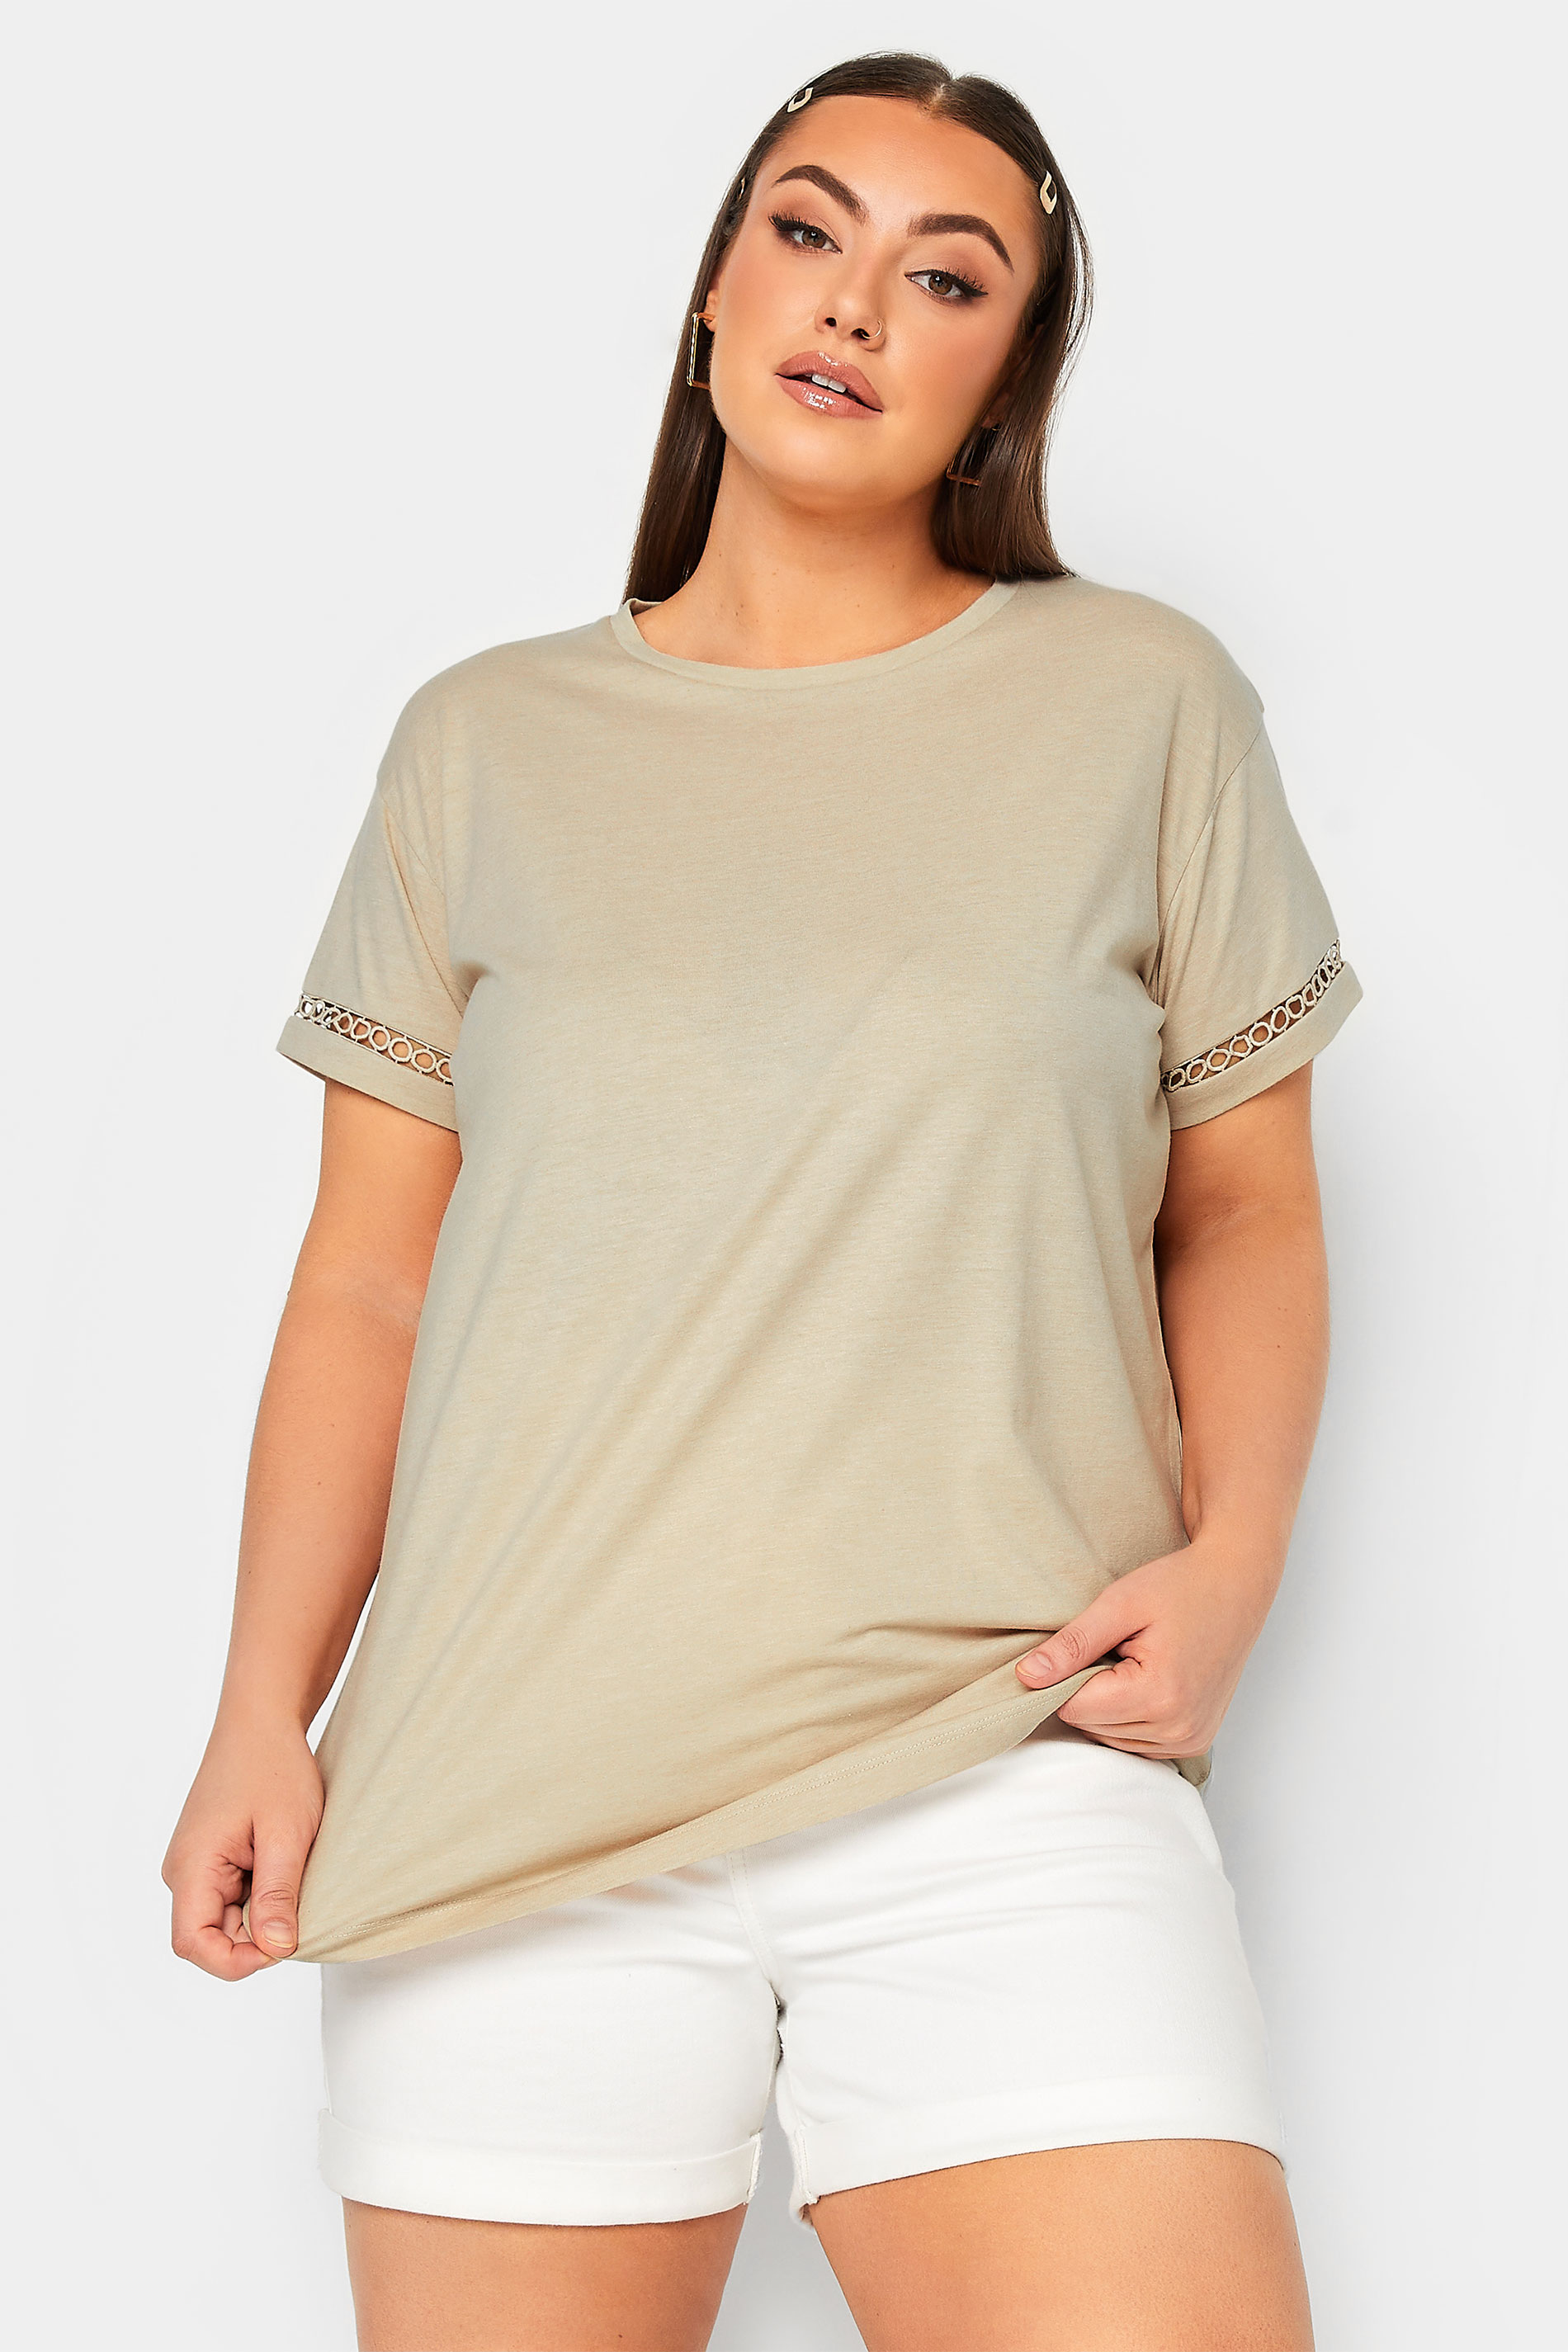 LIMITED COLLECTION Plus Size Beige Brown Crochet Trim T-Shirt | Yours Clothing  1